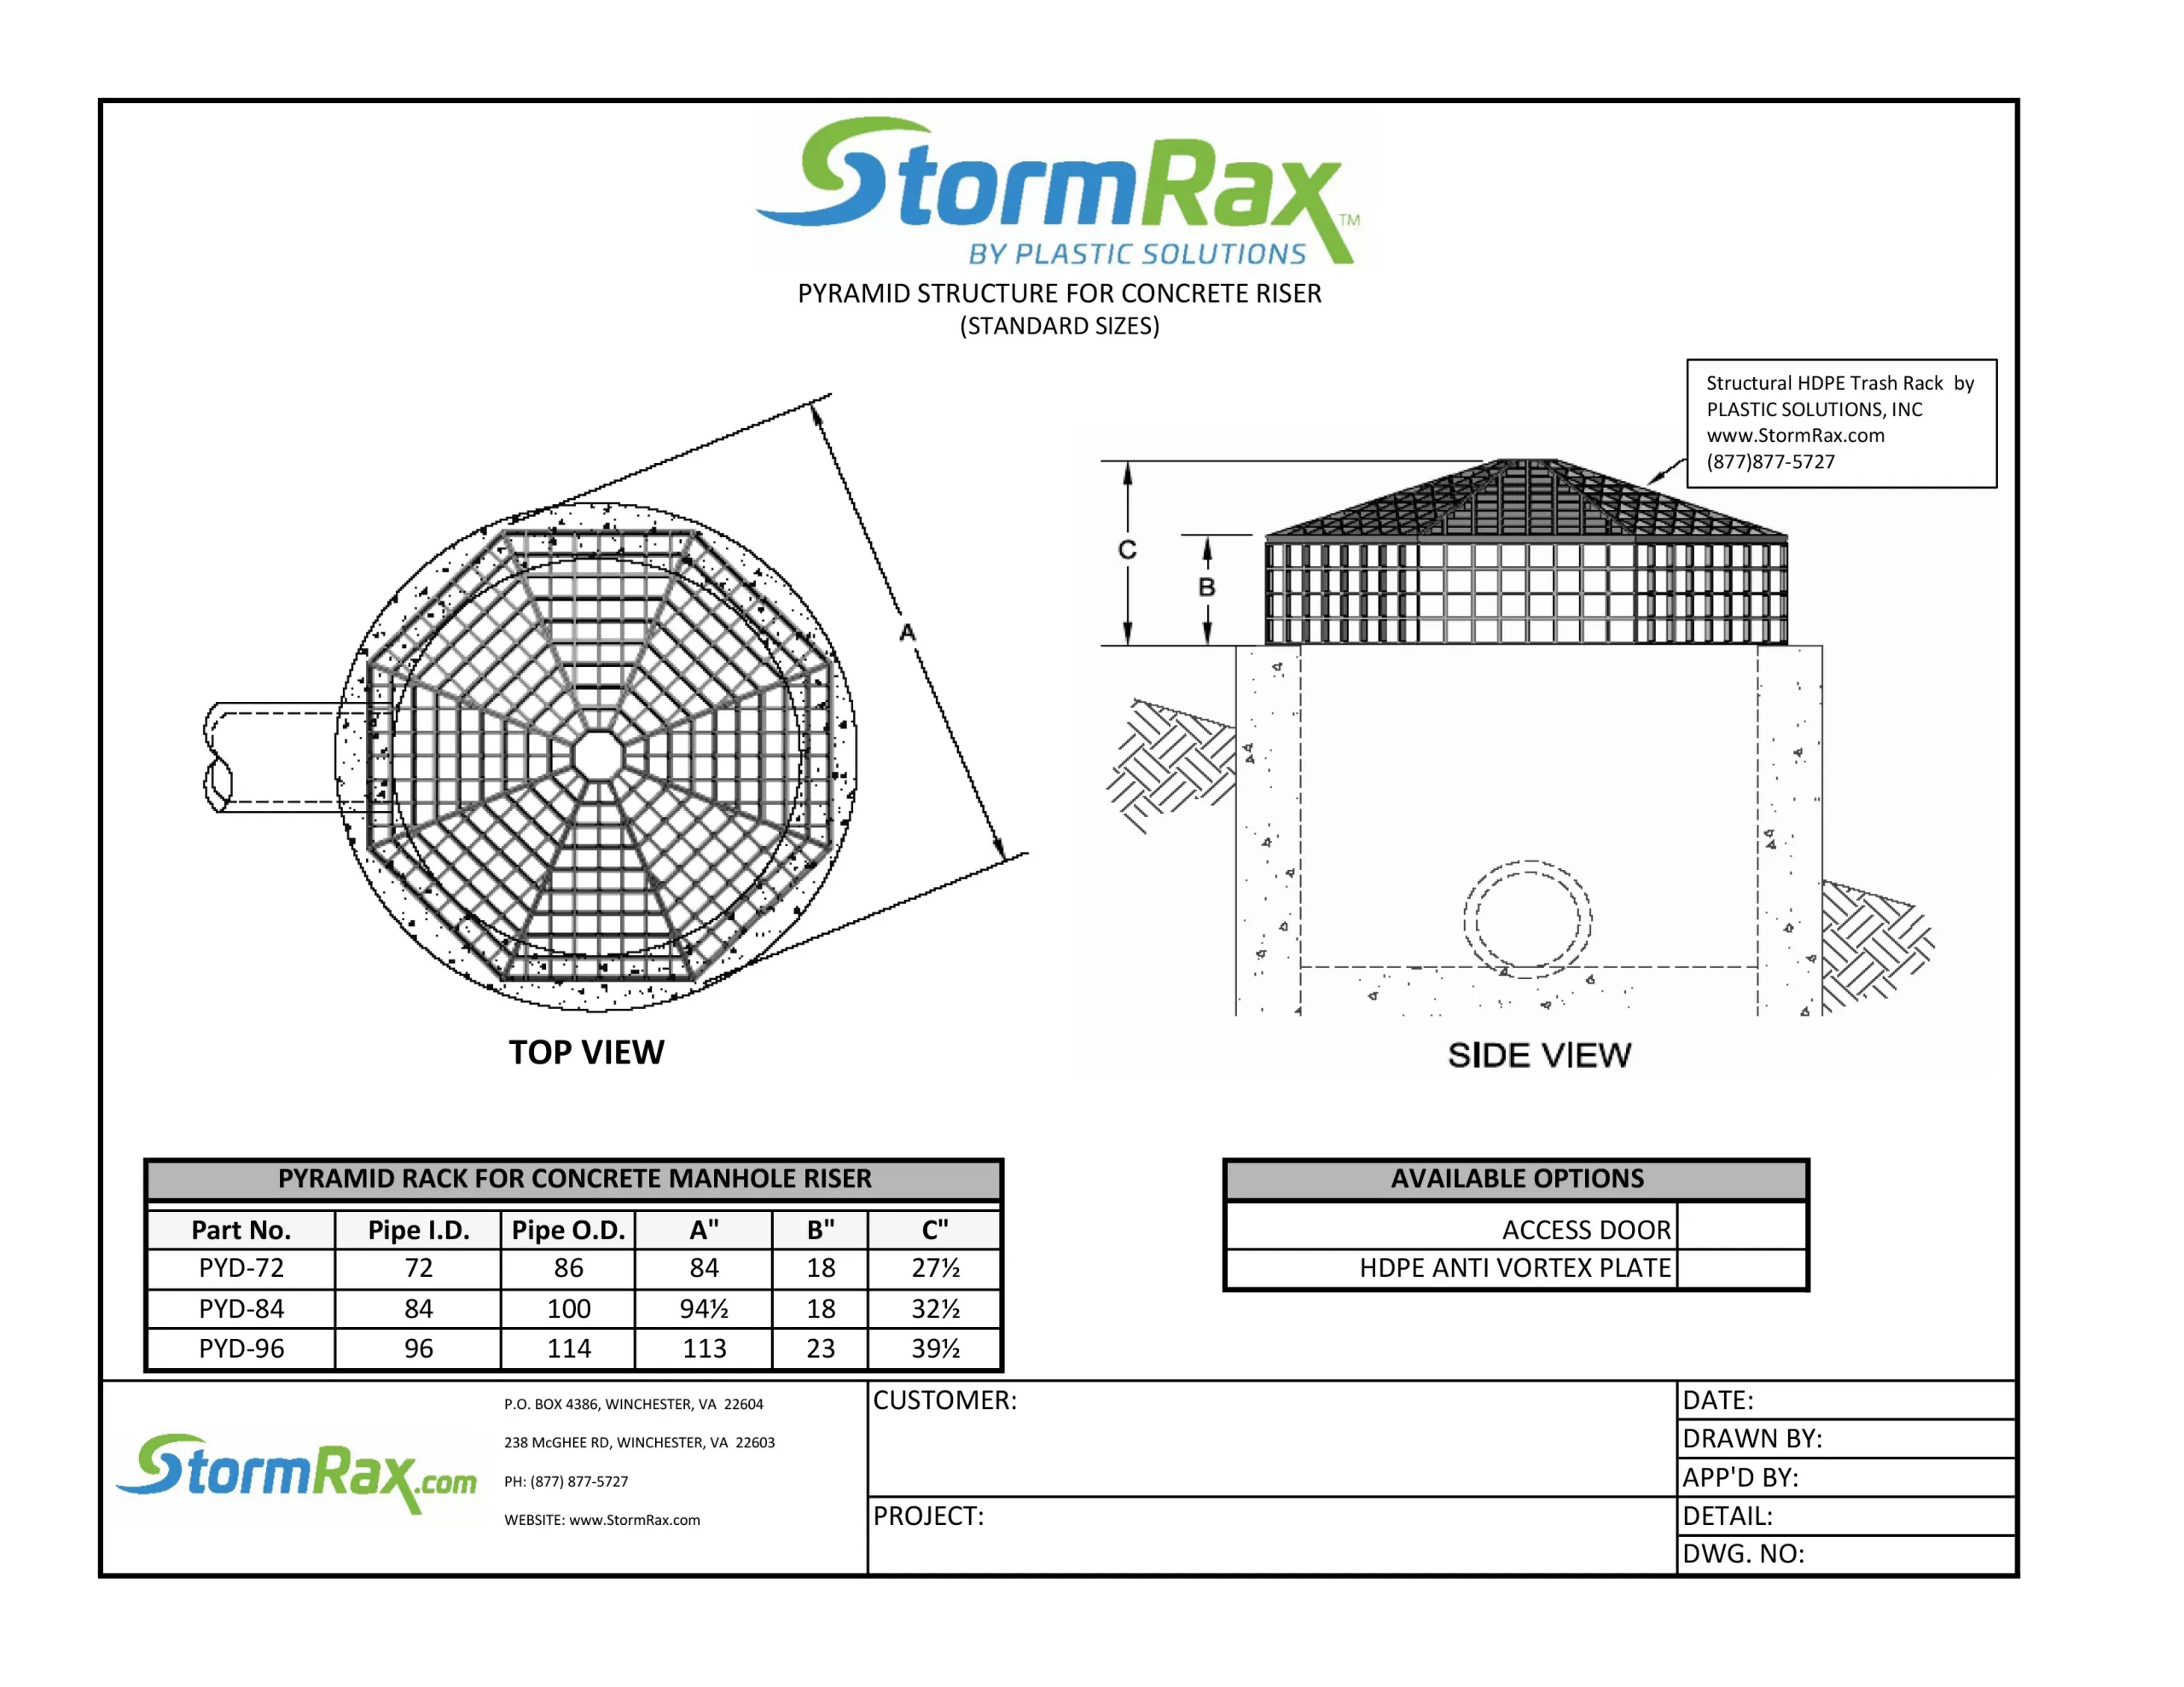 Technical drawing for stormrax pyramid rack for concrete riser